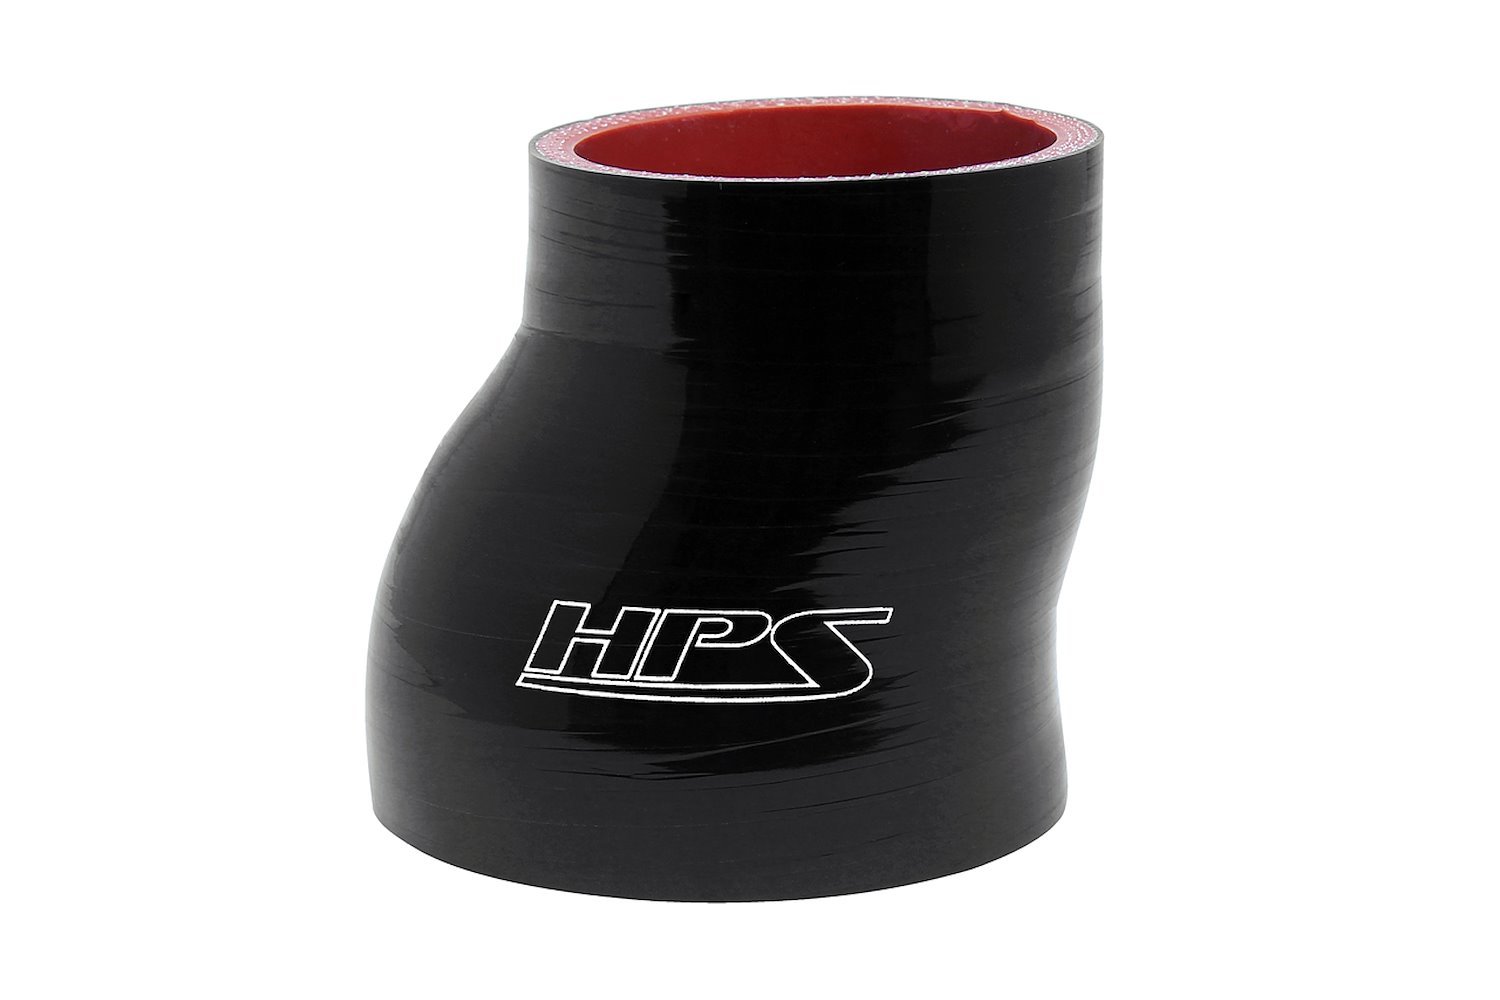 HTSOR-300-400-L4-BLK Silicone Offset Reducer Hose, High-Temp Reinforced, 3 in. - 4 in. ID, 4 in. Long, Black